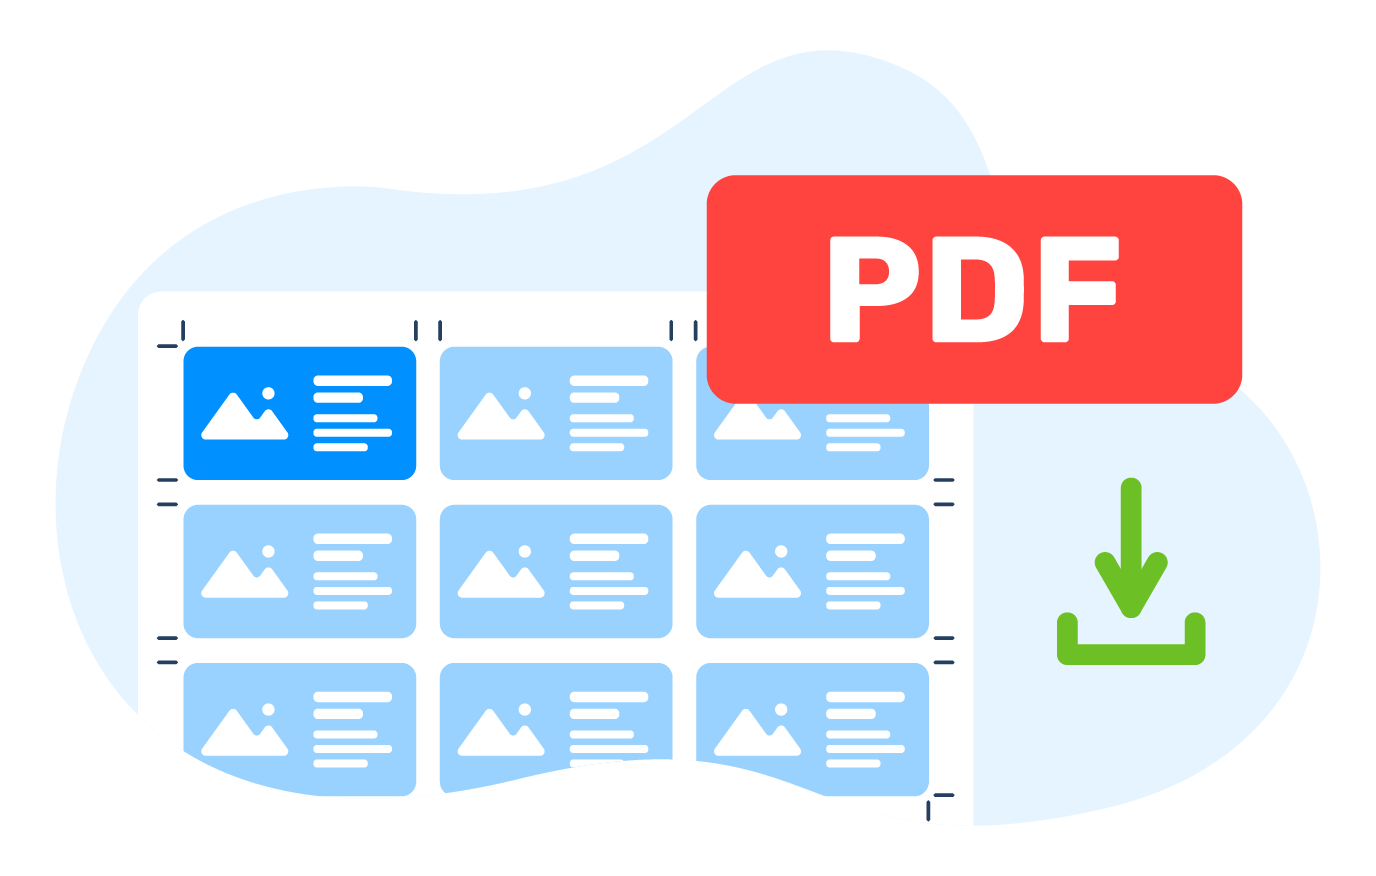 Download a PDF file with the imposed sheet